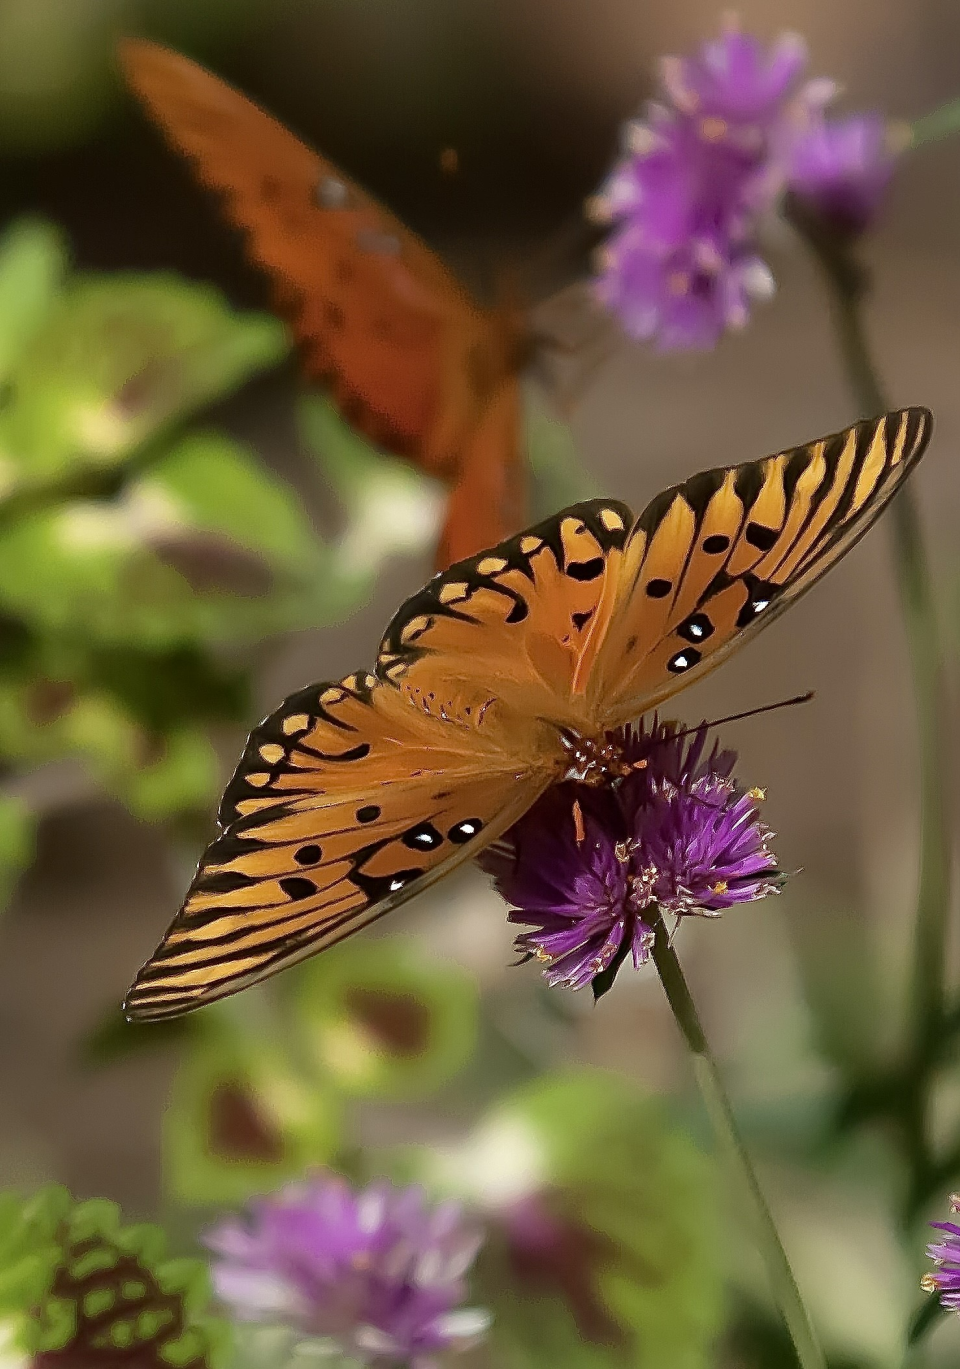 Truffula Pink gomphrena is recognized as a butterfly champion Here two Gulf Fritillary butterflies have selected their blossoms for feeding.